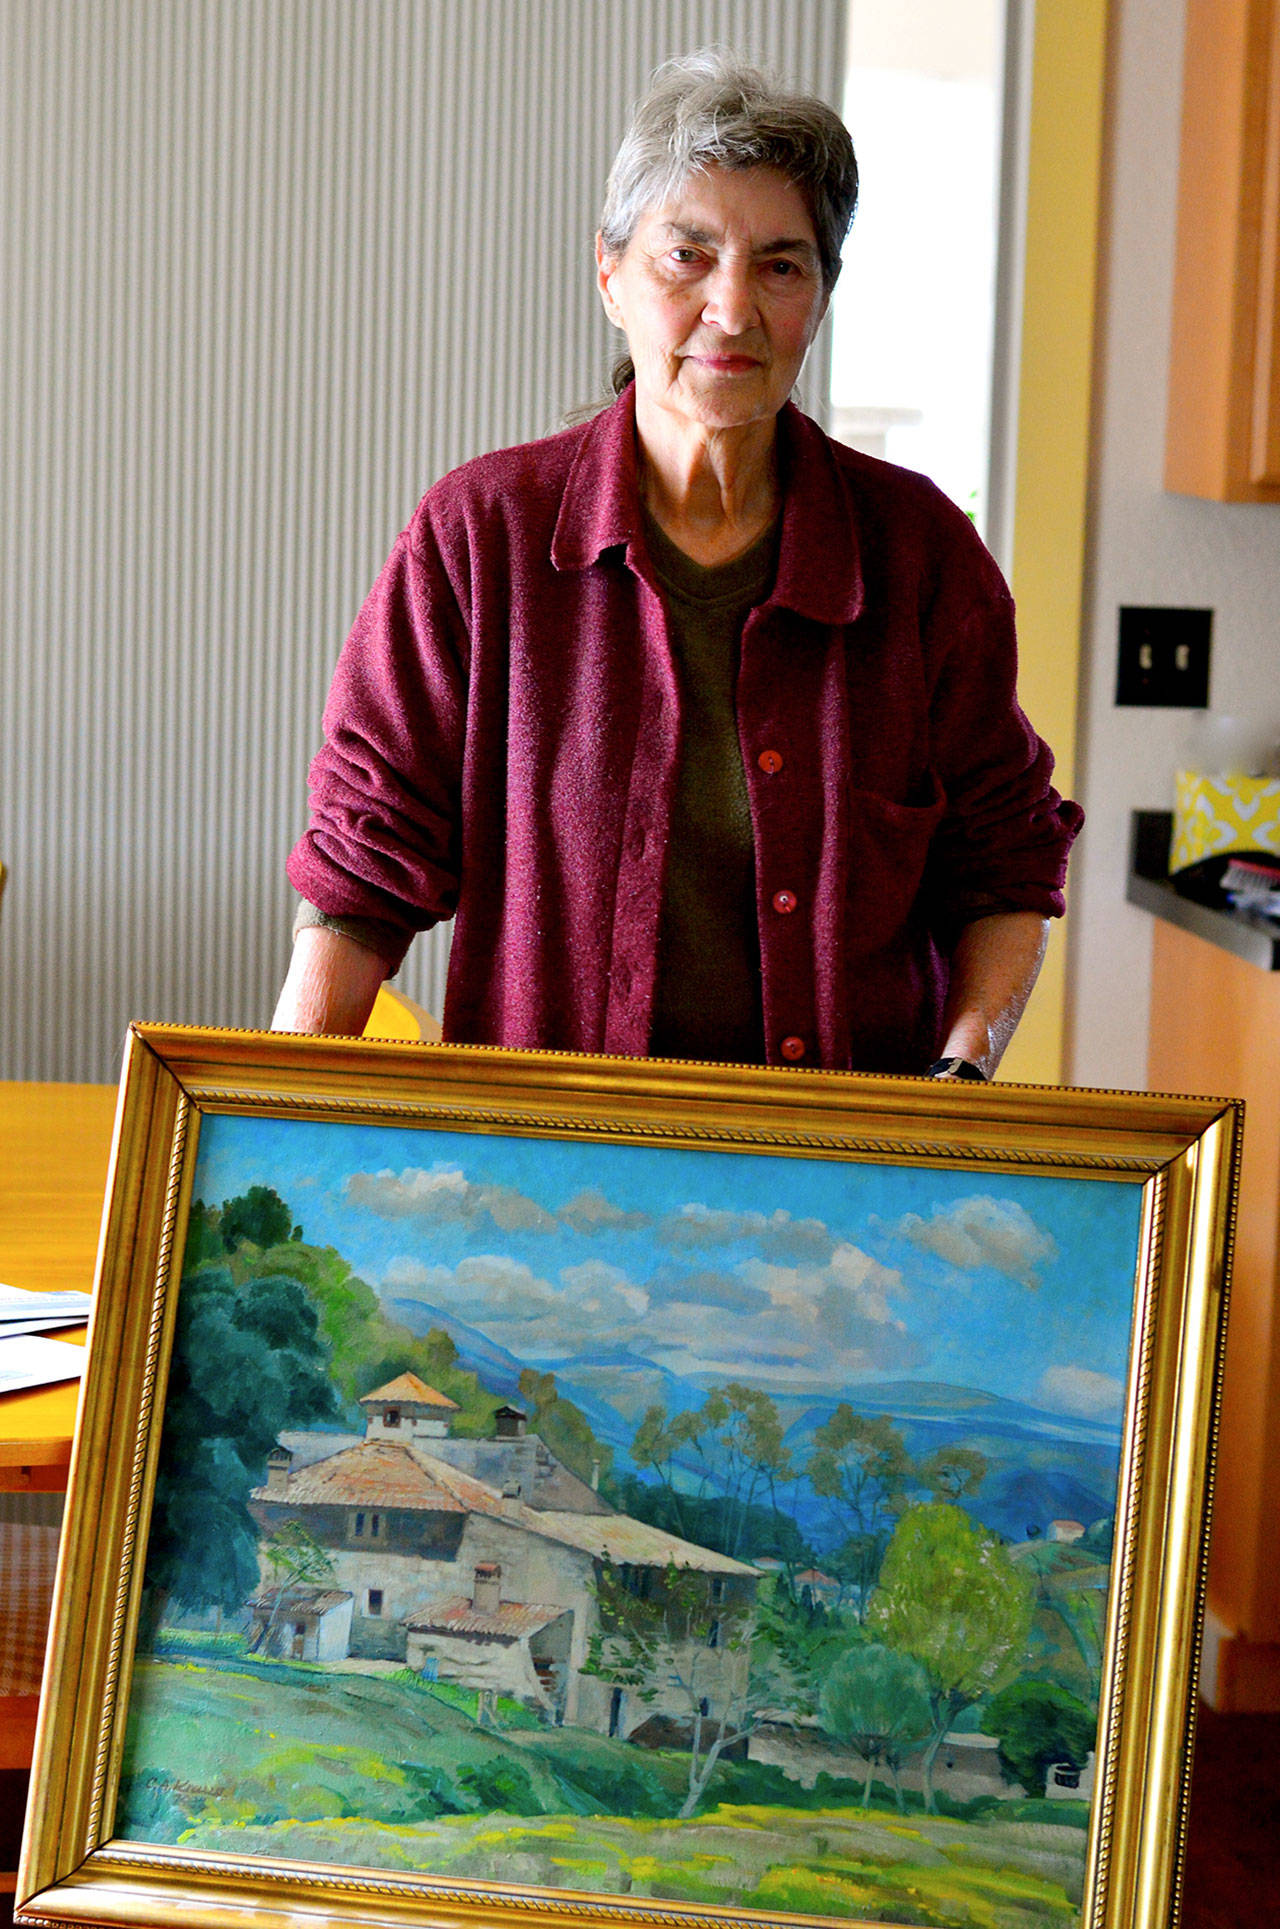 After many years, Joy Qualey of Port Townsend found the rightful owner of an 89-year-old painting titled “Les Milles, Aix-en-Provence.” (Diane Urbani de la Paz/for Peninsula Daily News)